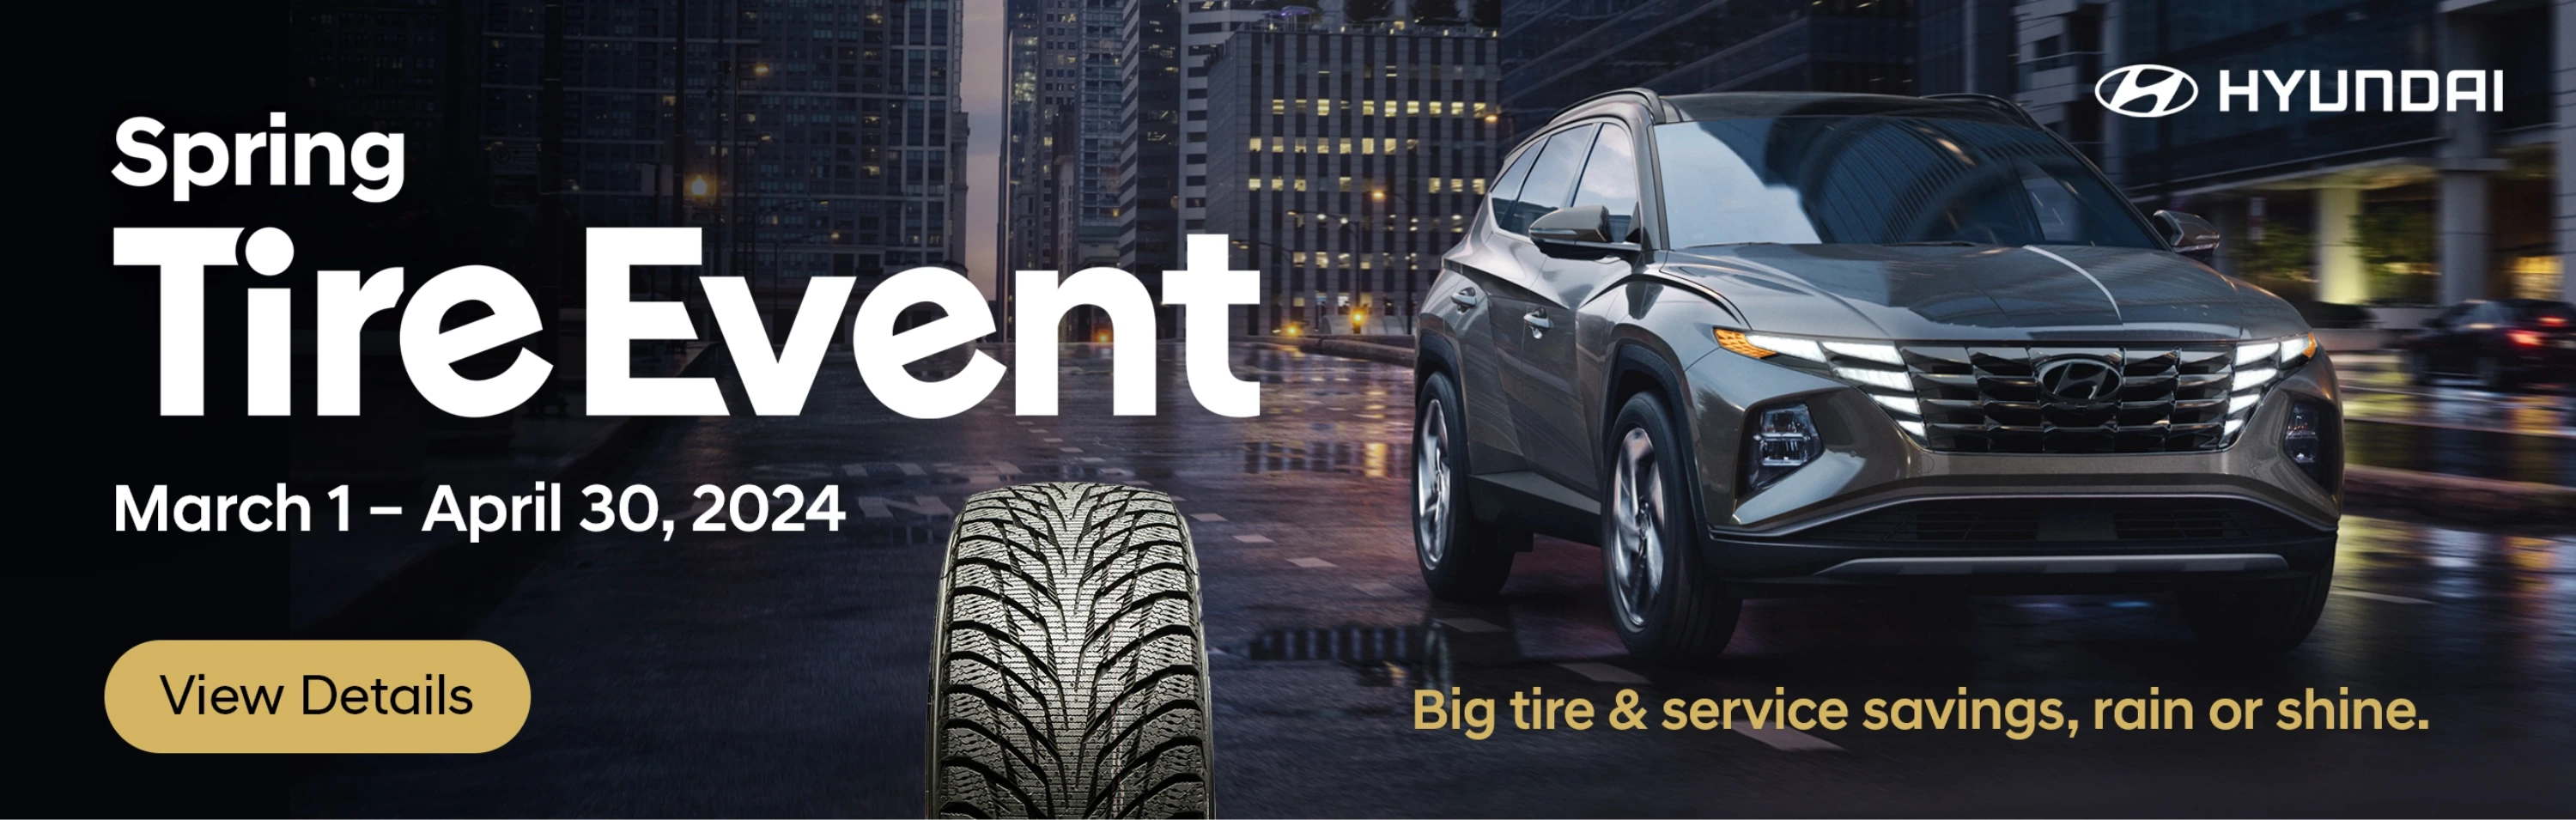 spring Tire Promotion